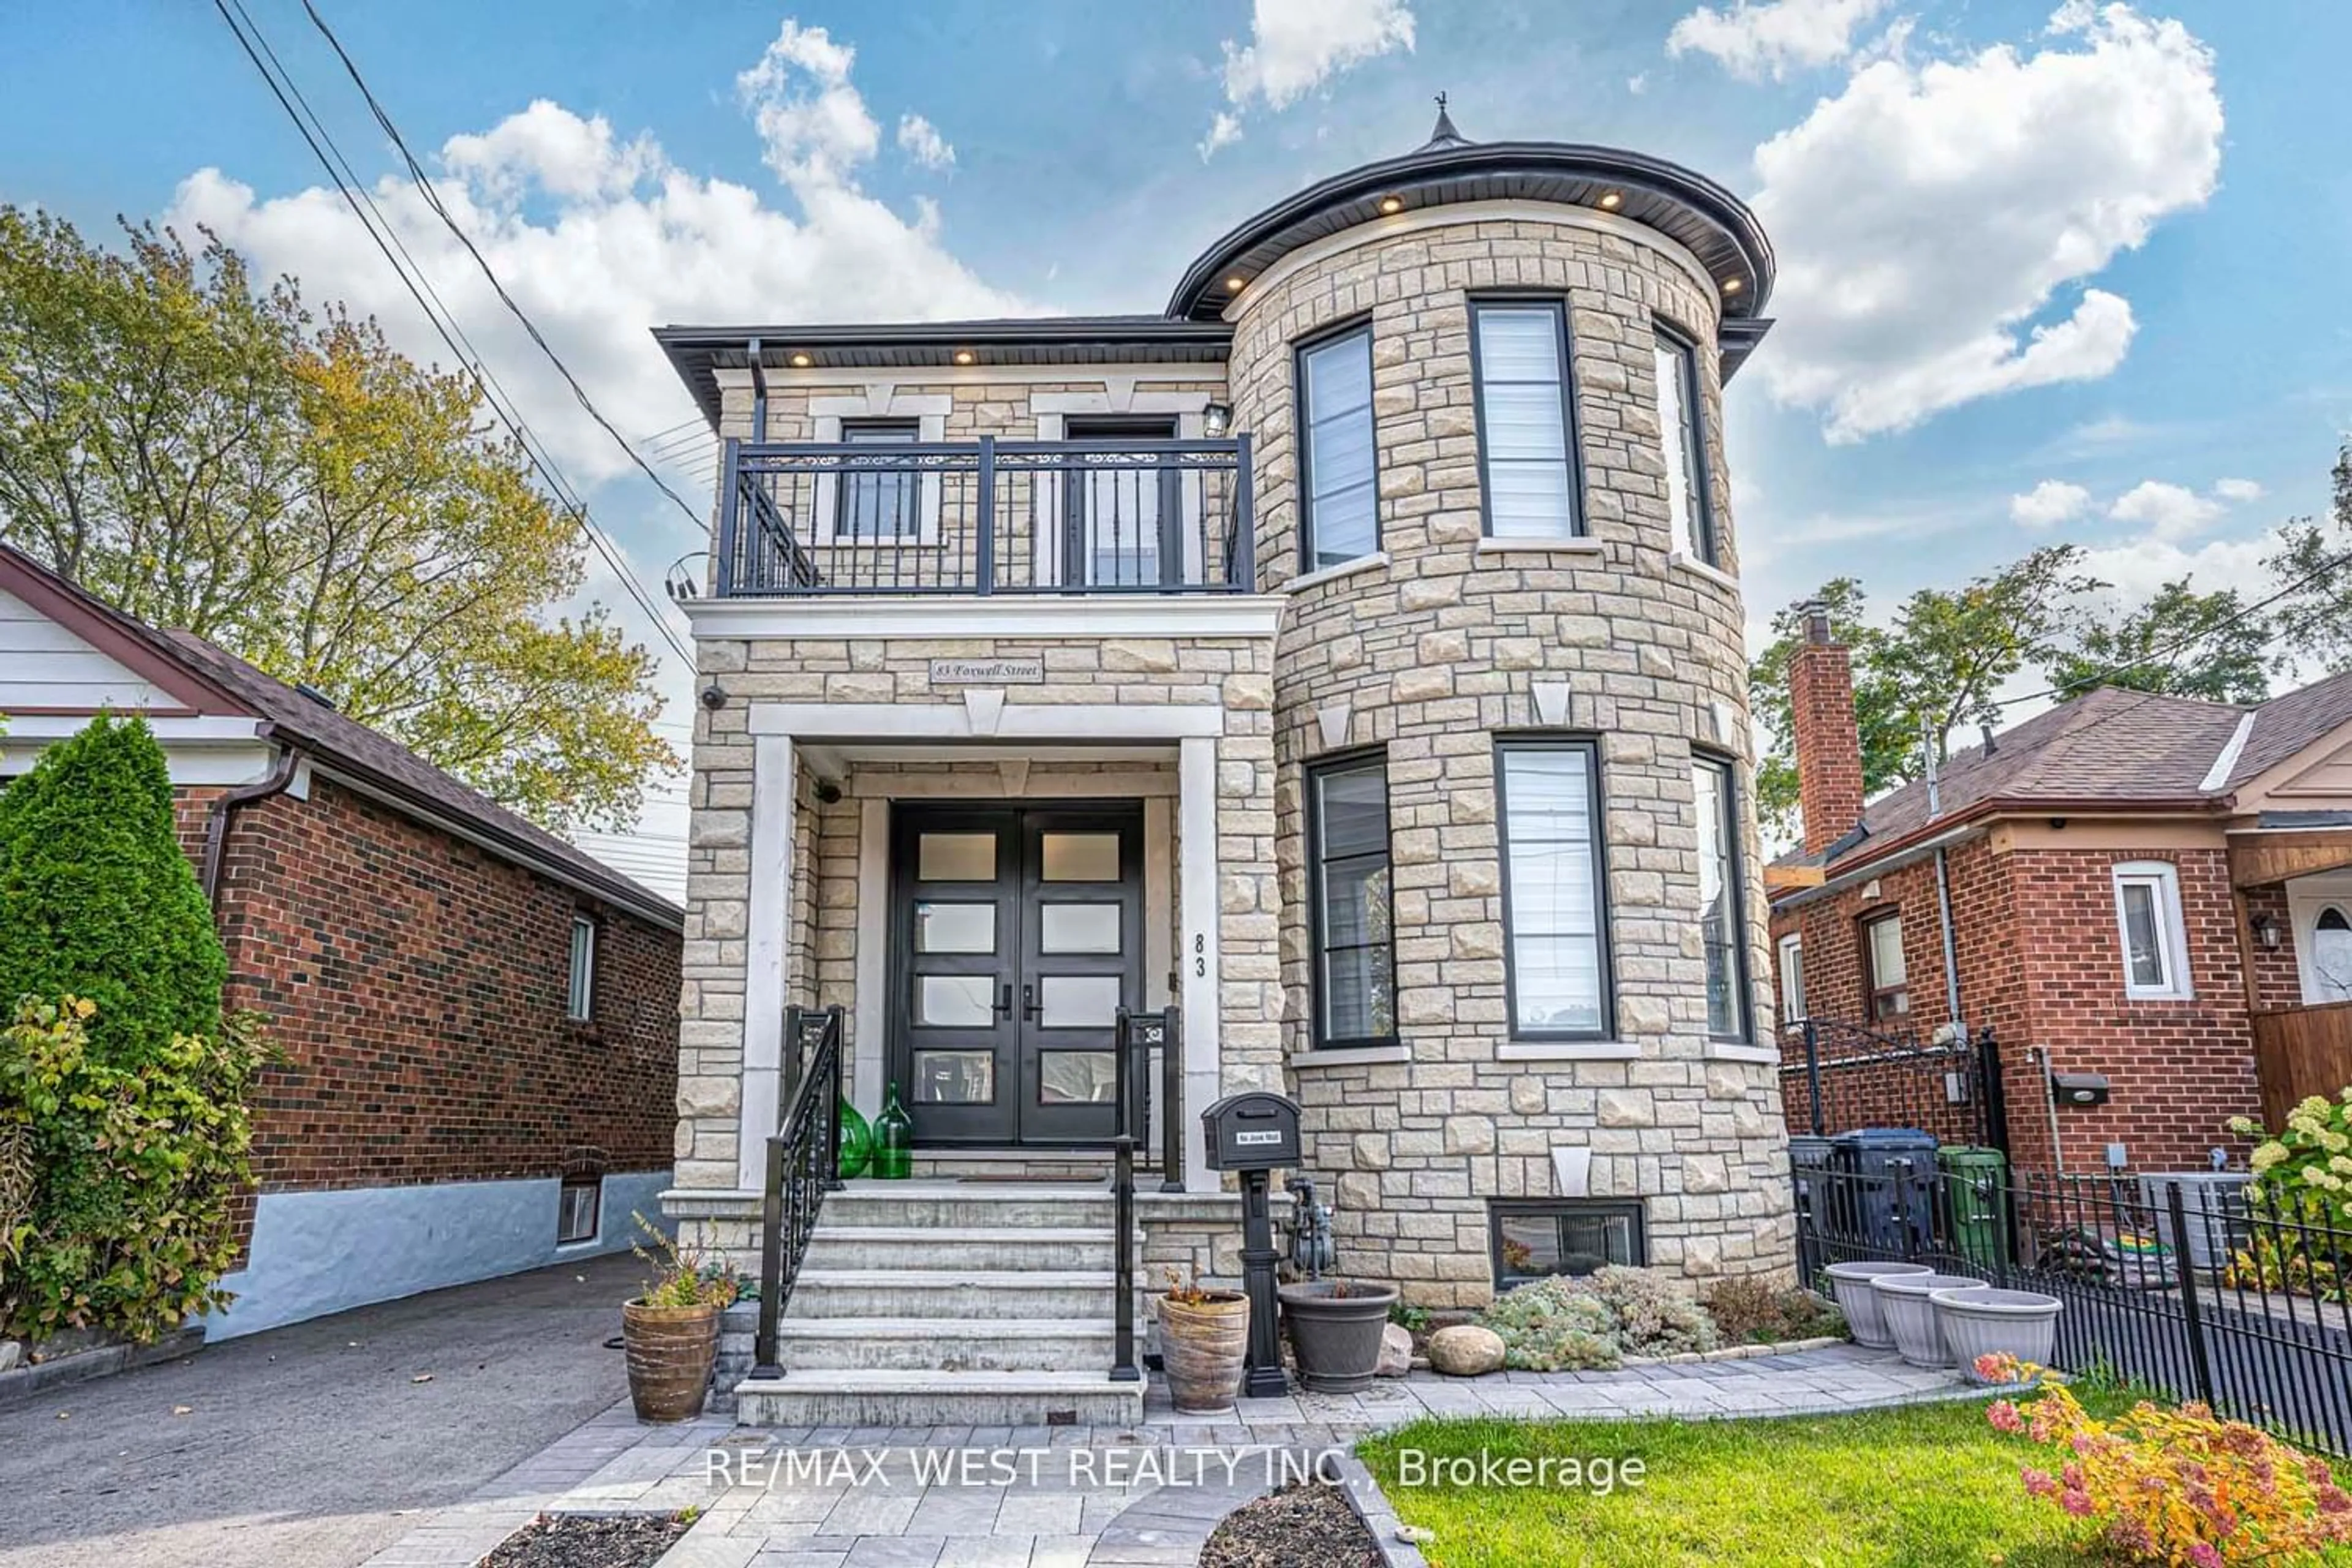 Home with brick exterior material for 83 Foxwell St, Toronto Ontario M6N 1Y9